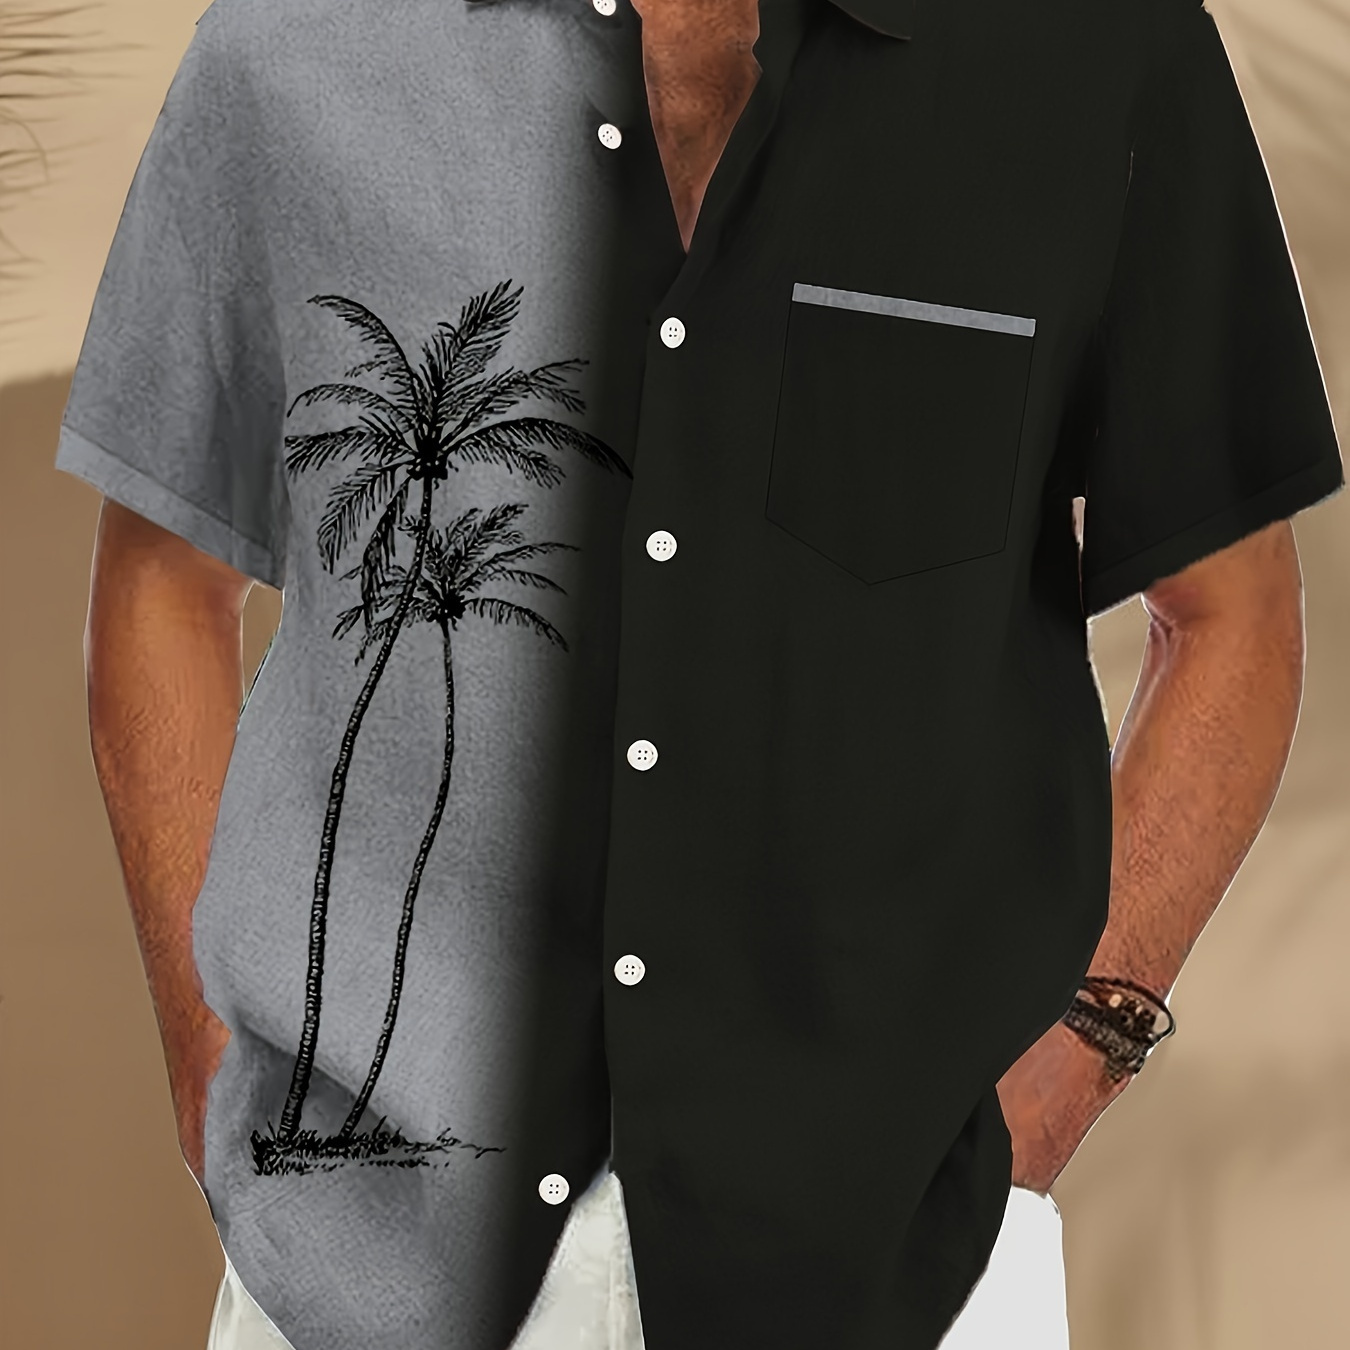 

Plus Size Men's Coconut Trees Graphic Print Shirt For Summer, Casual Fashion Short Sleeve Shirt